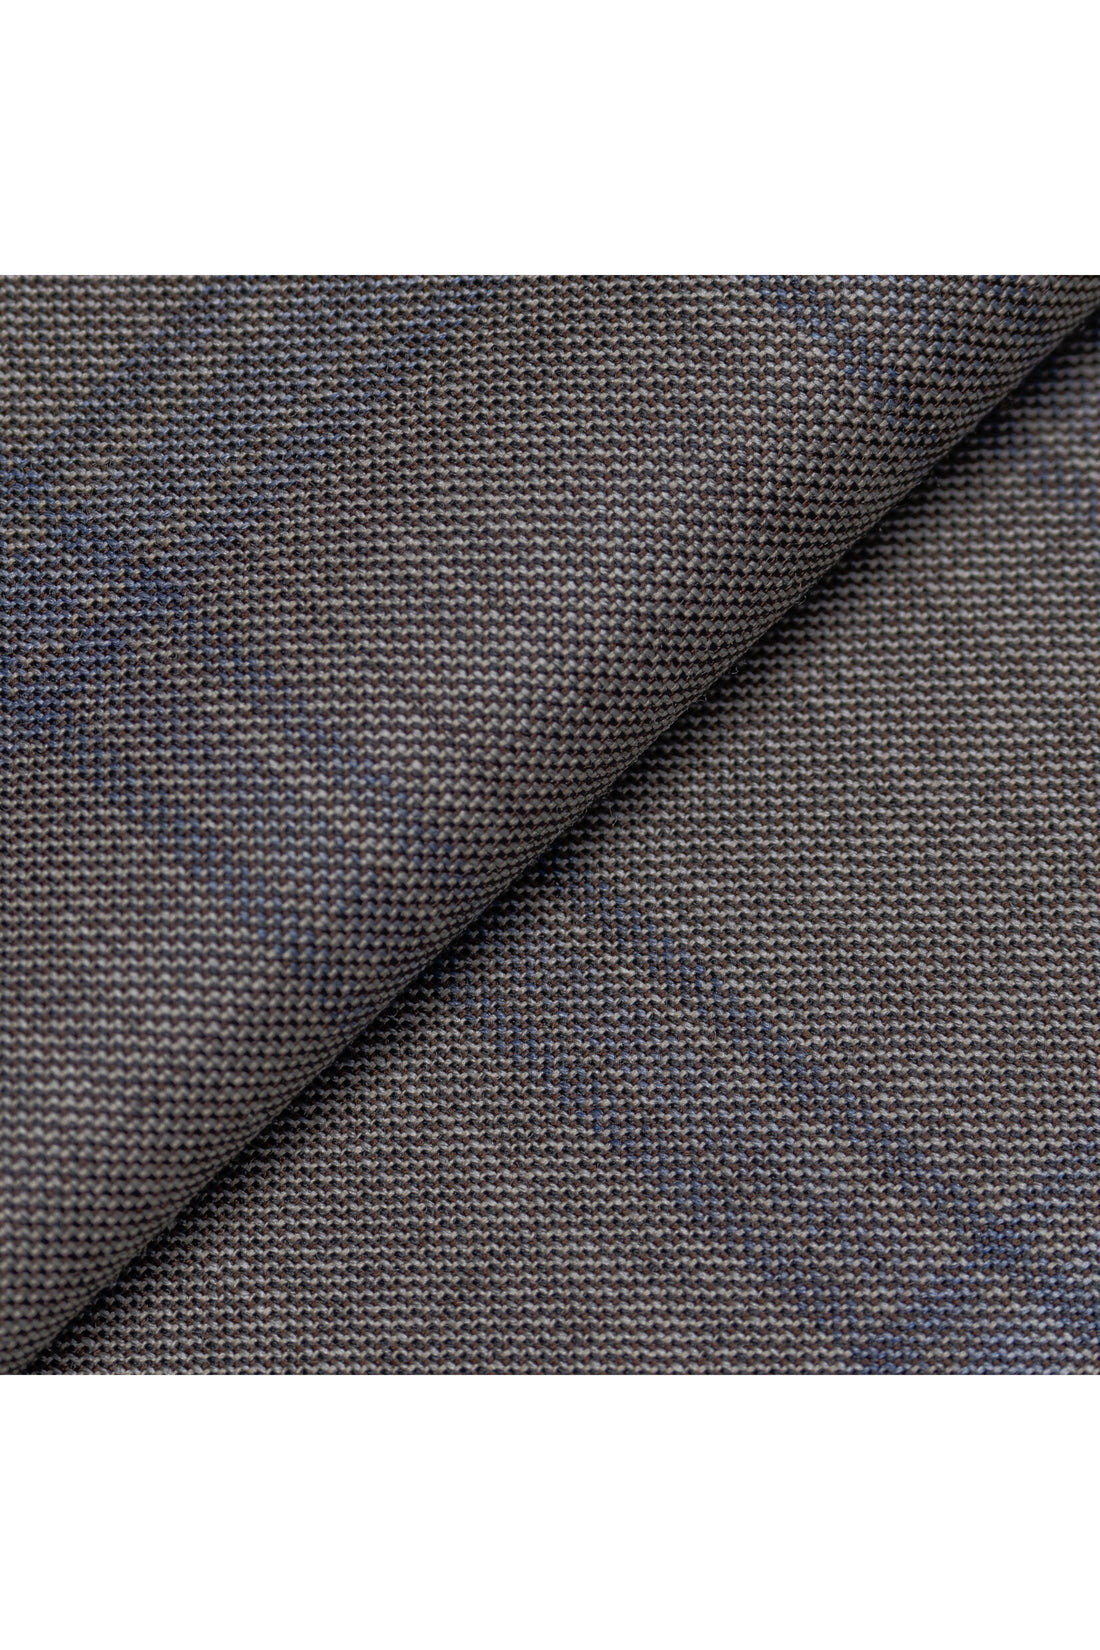 Tan with Charcoal and Blue 130's Windowpane Suit